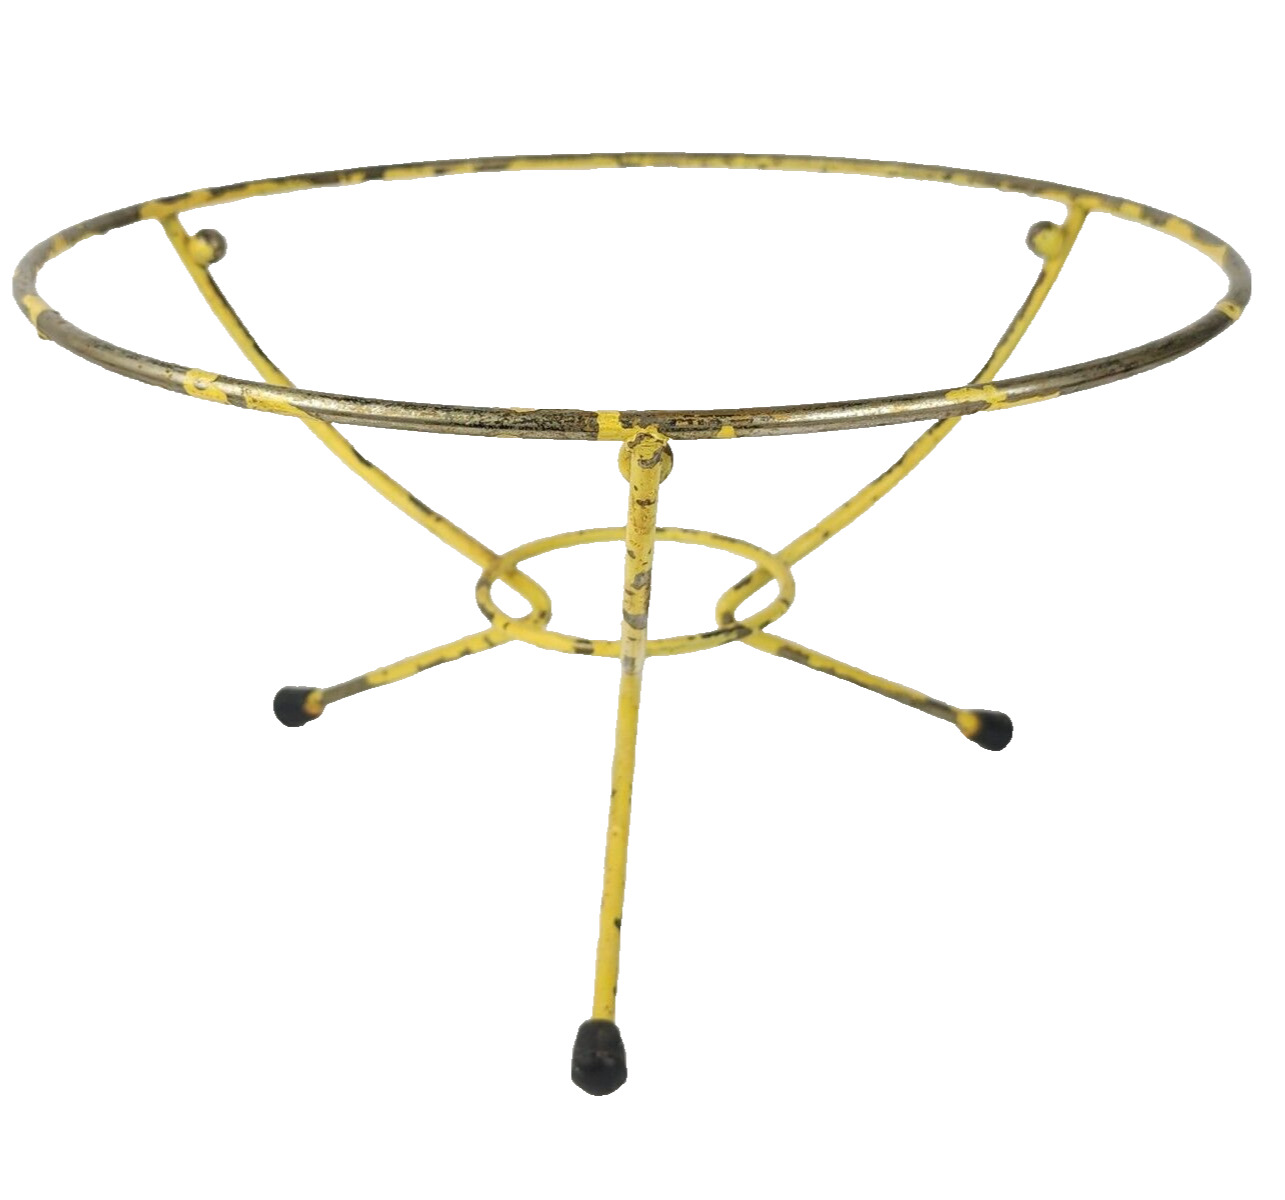 Vintage Mid Century Modern MCM Round Metal Wire Tripod Stand Or Cradle Yellow